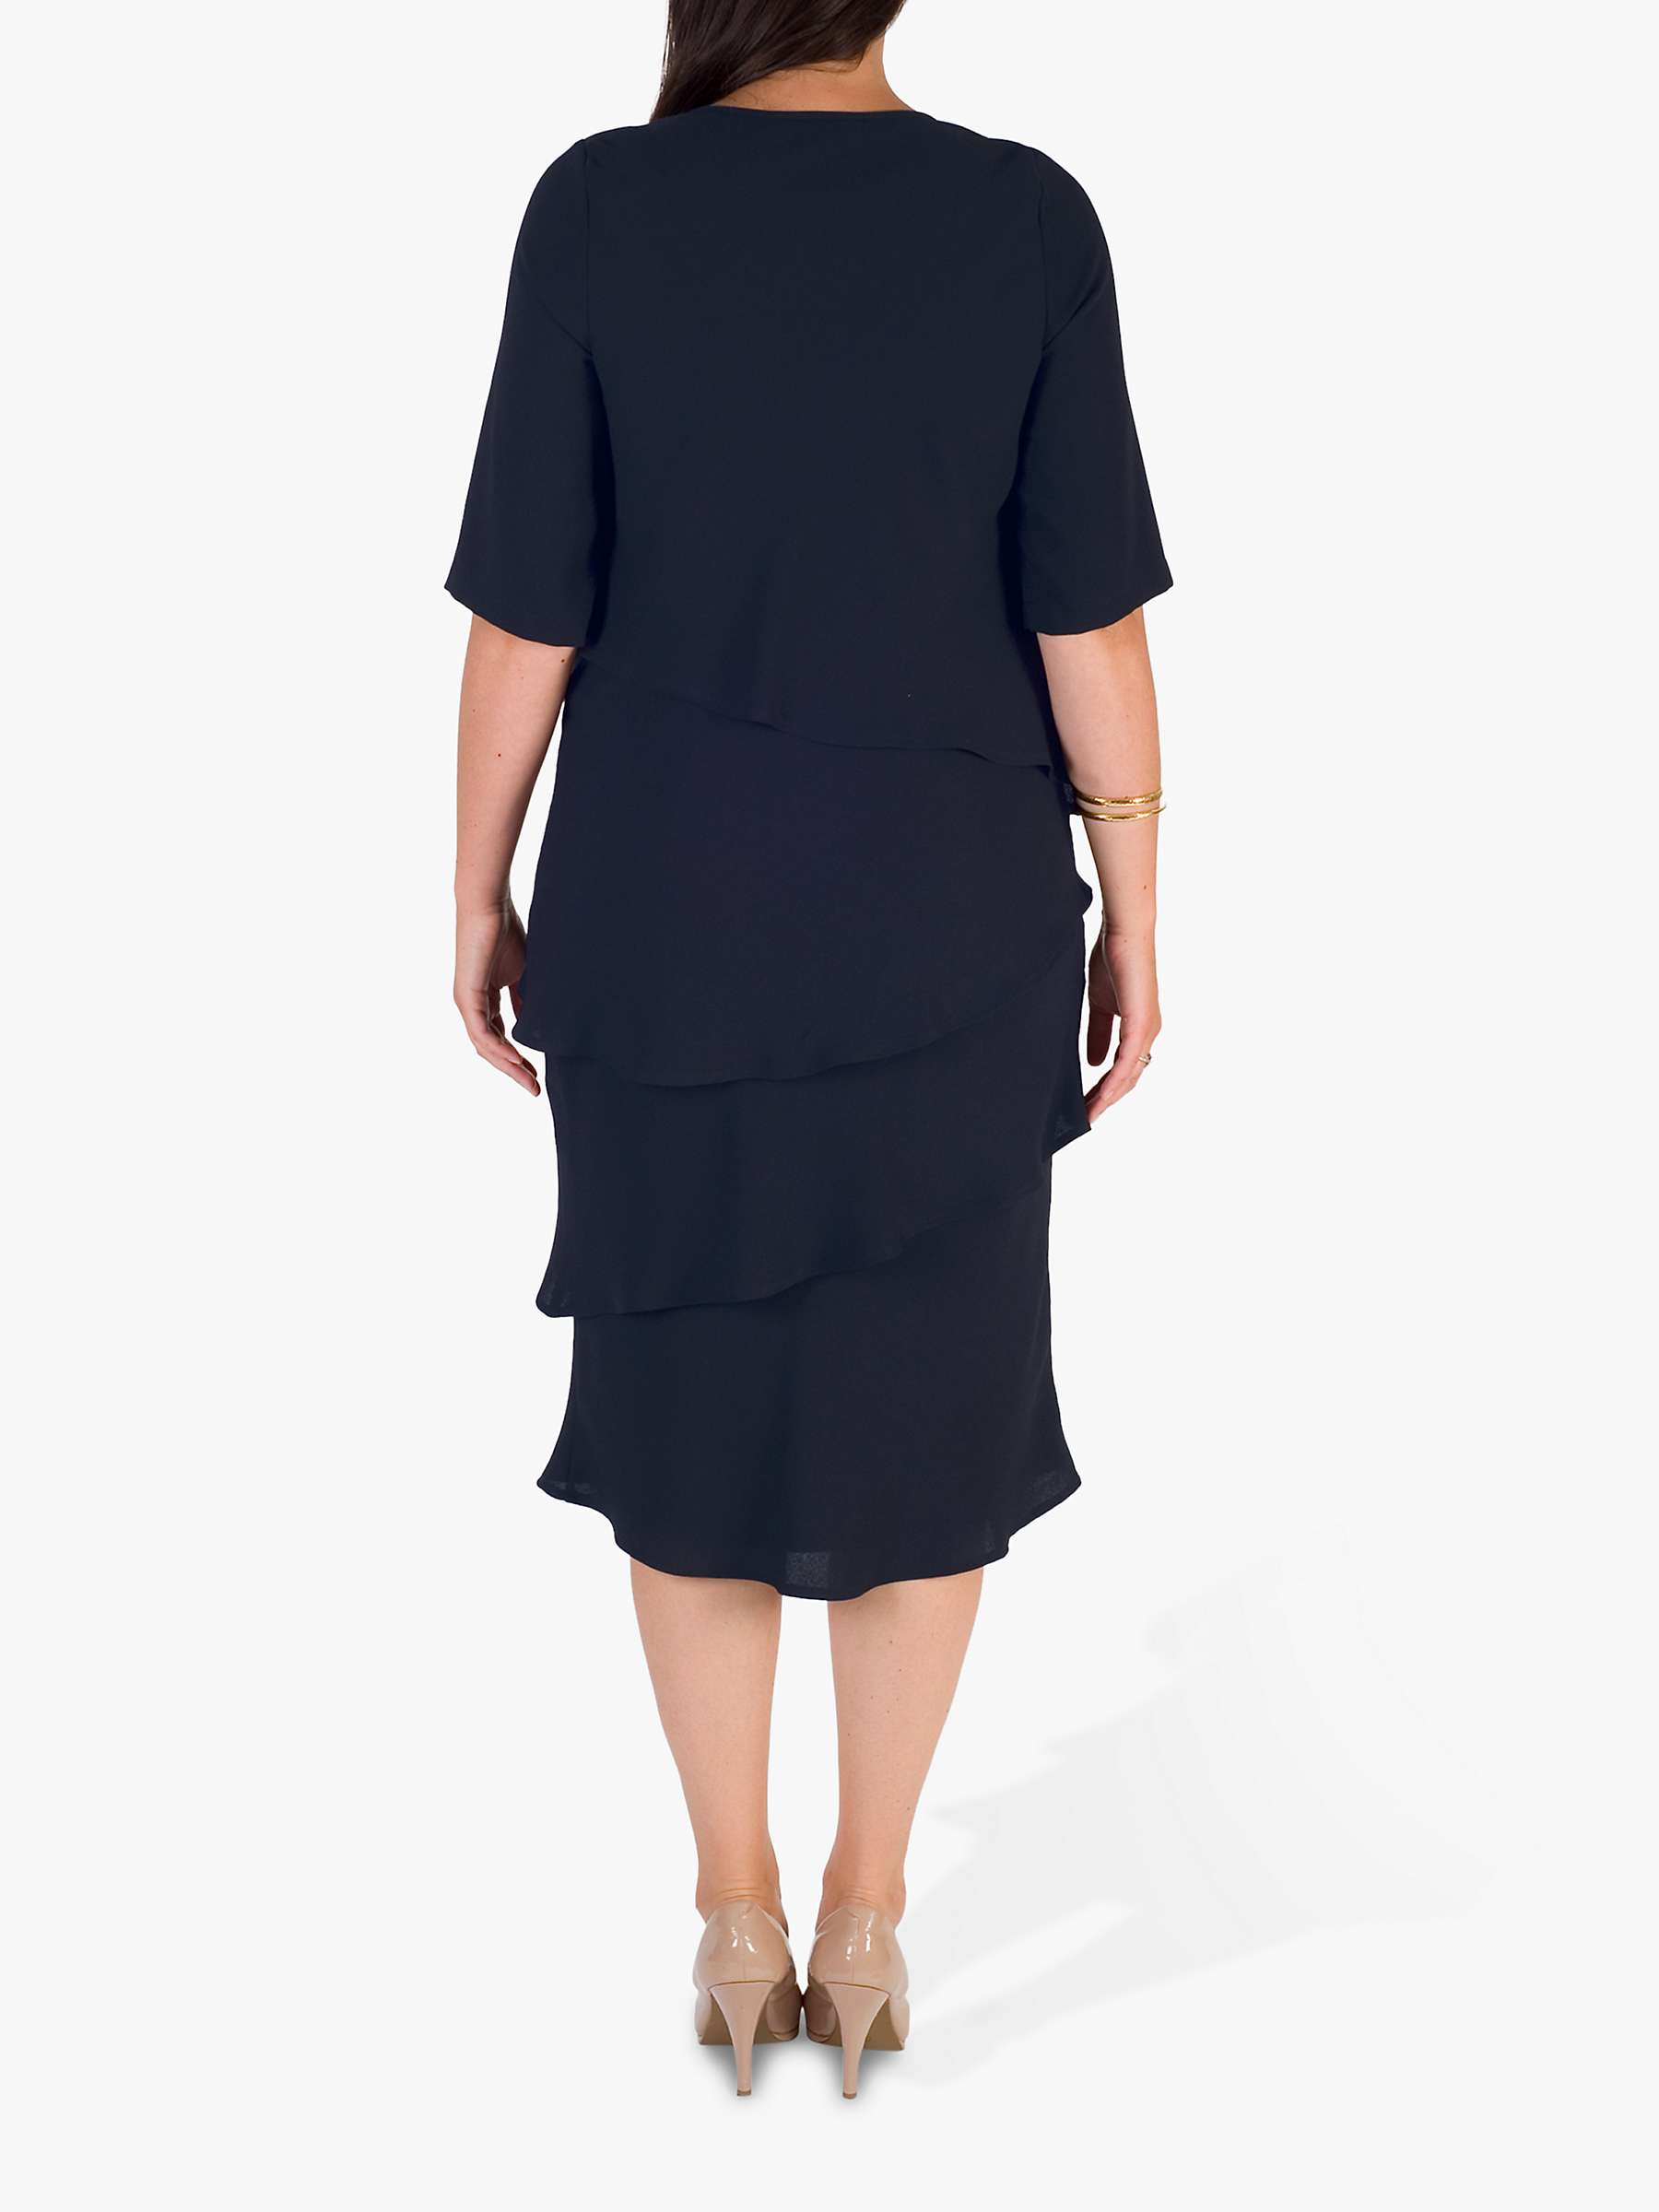 Buy chesca Multi Layered Dress, Navy Online at johnlewis.com